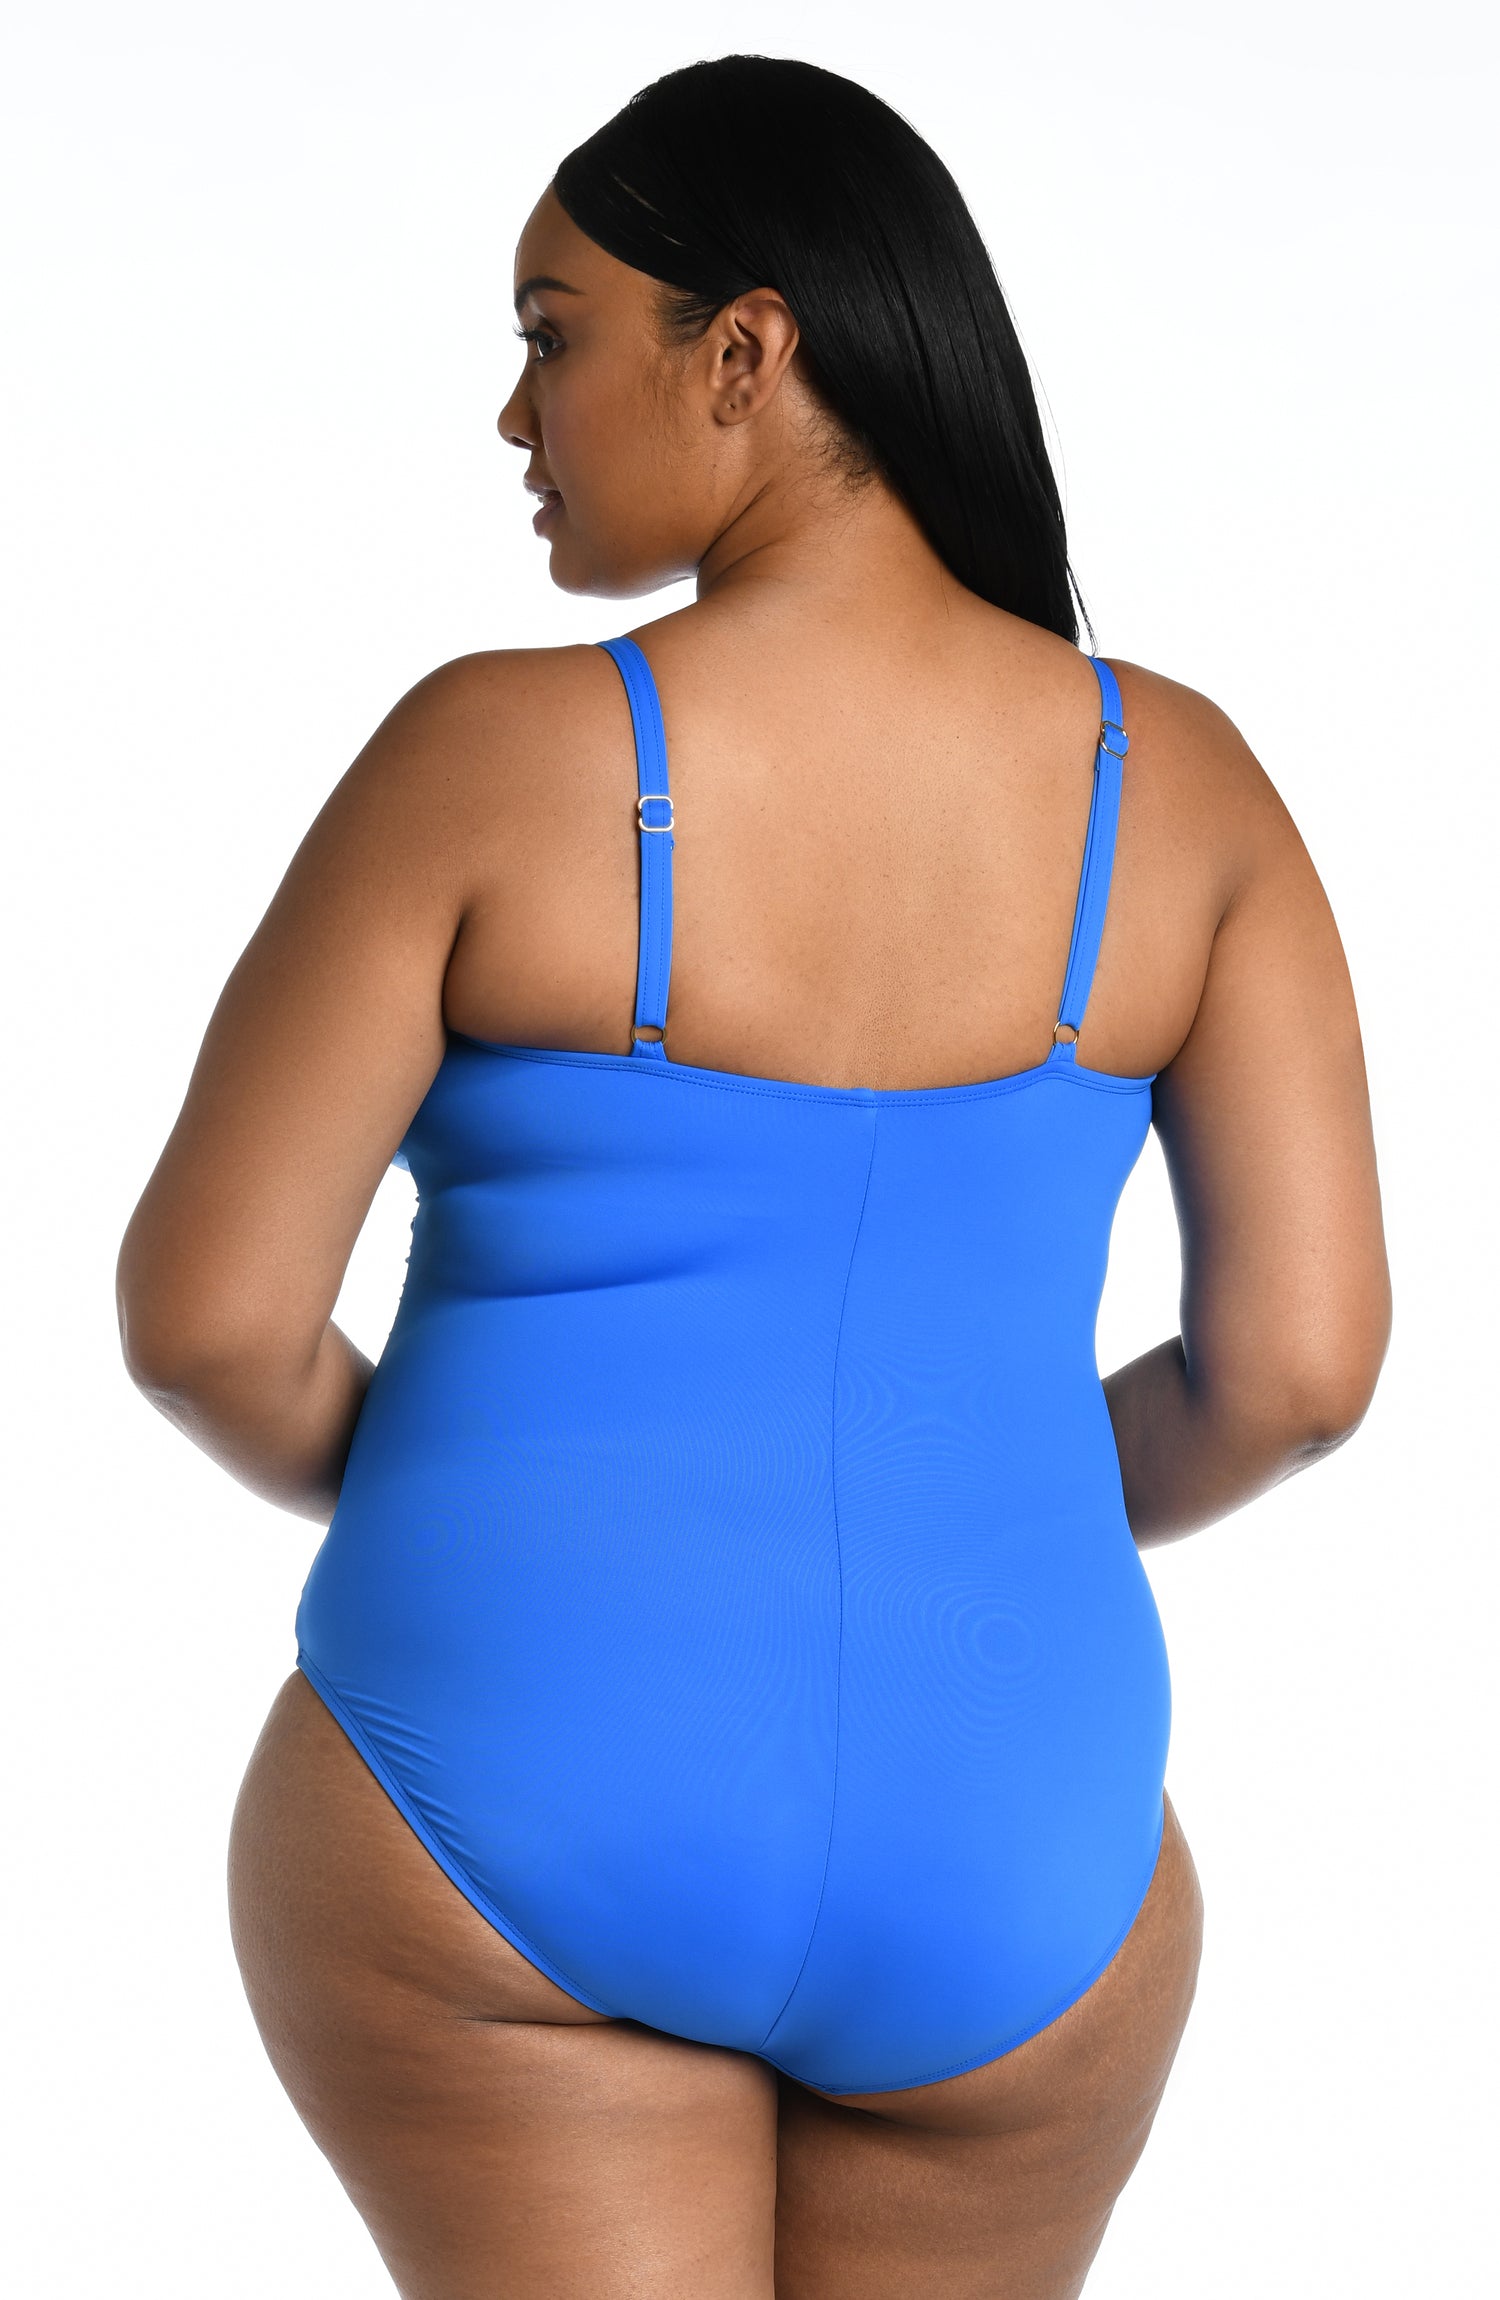 Model is wearing a capri blue colored one piece swimsuit from our Best-Selling Island Goddess collection.